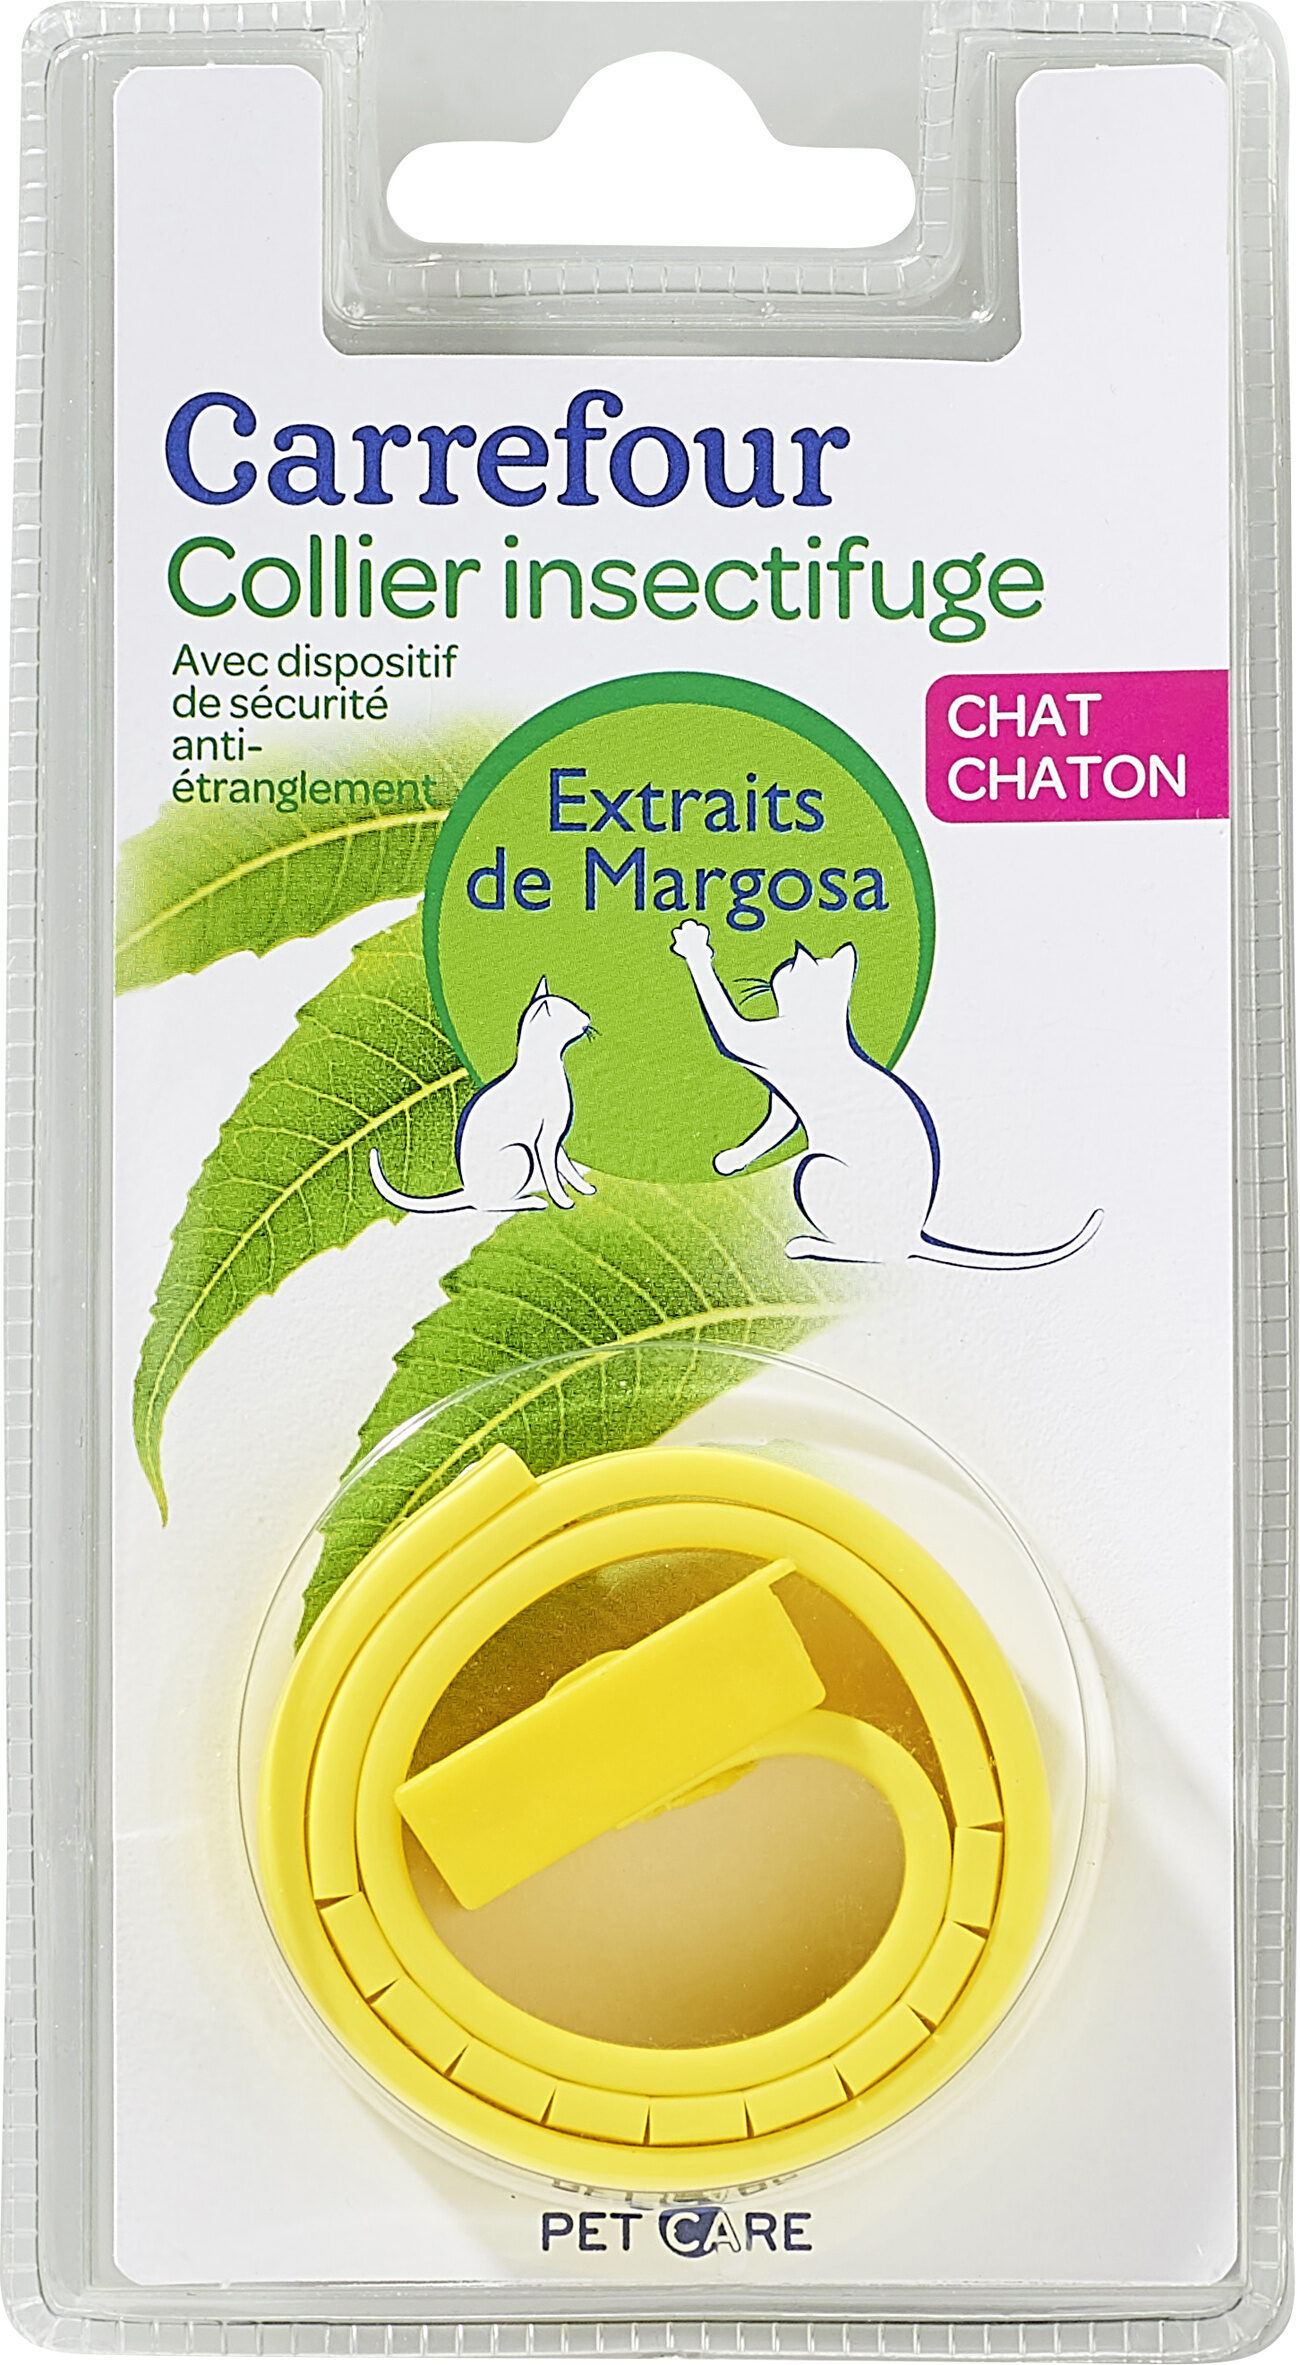 Collier insectifuge - Product - fr